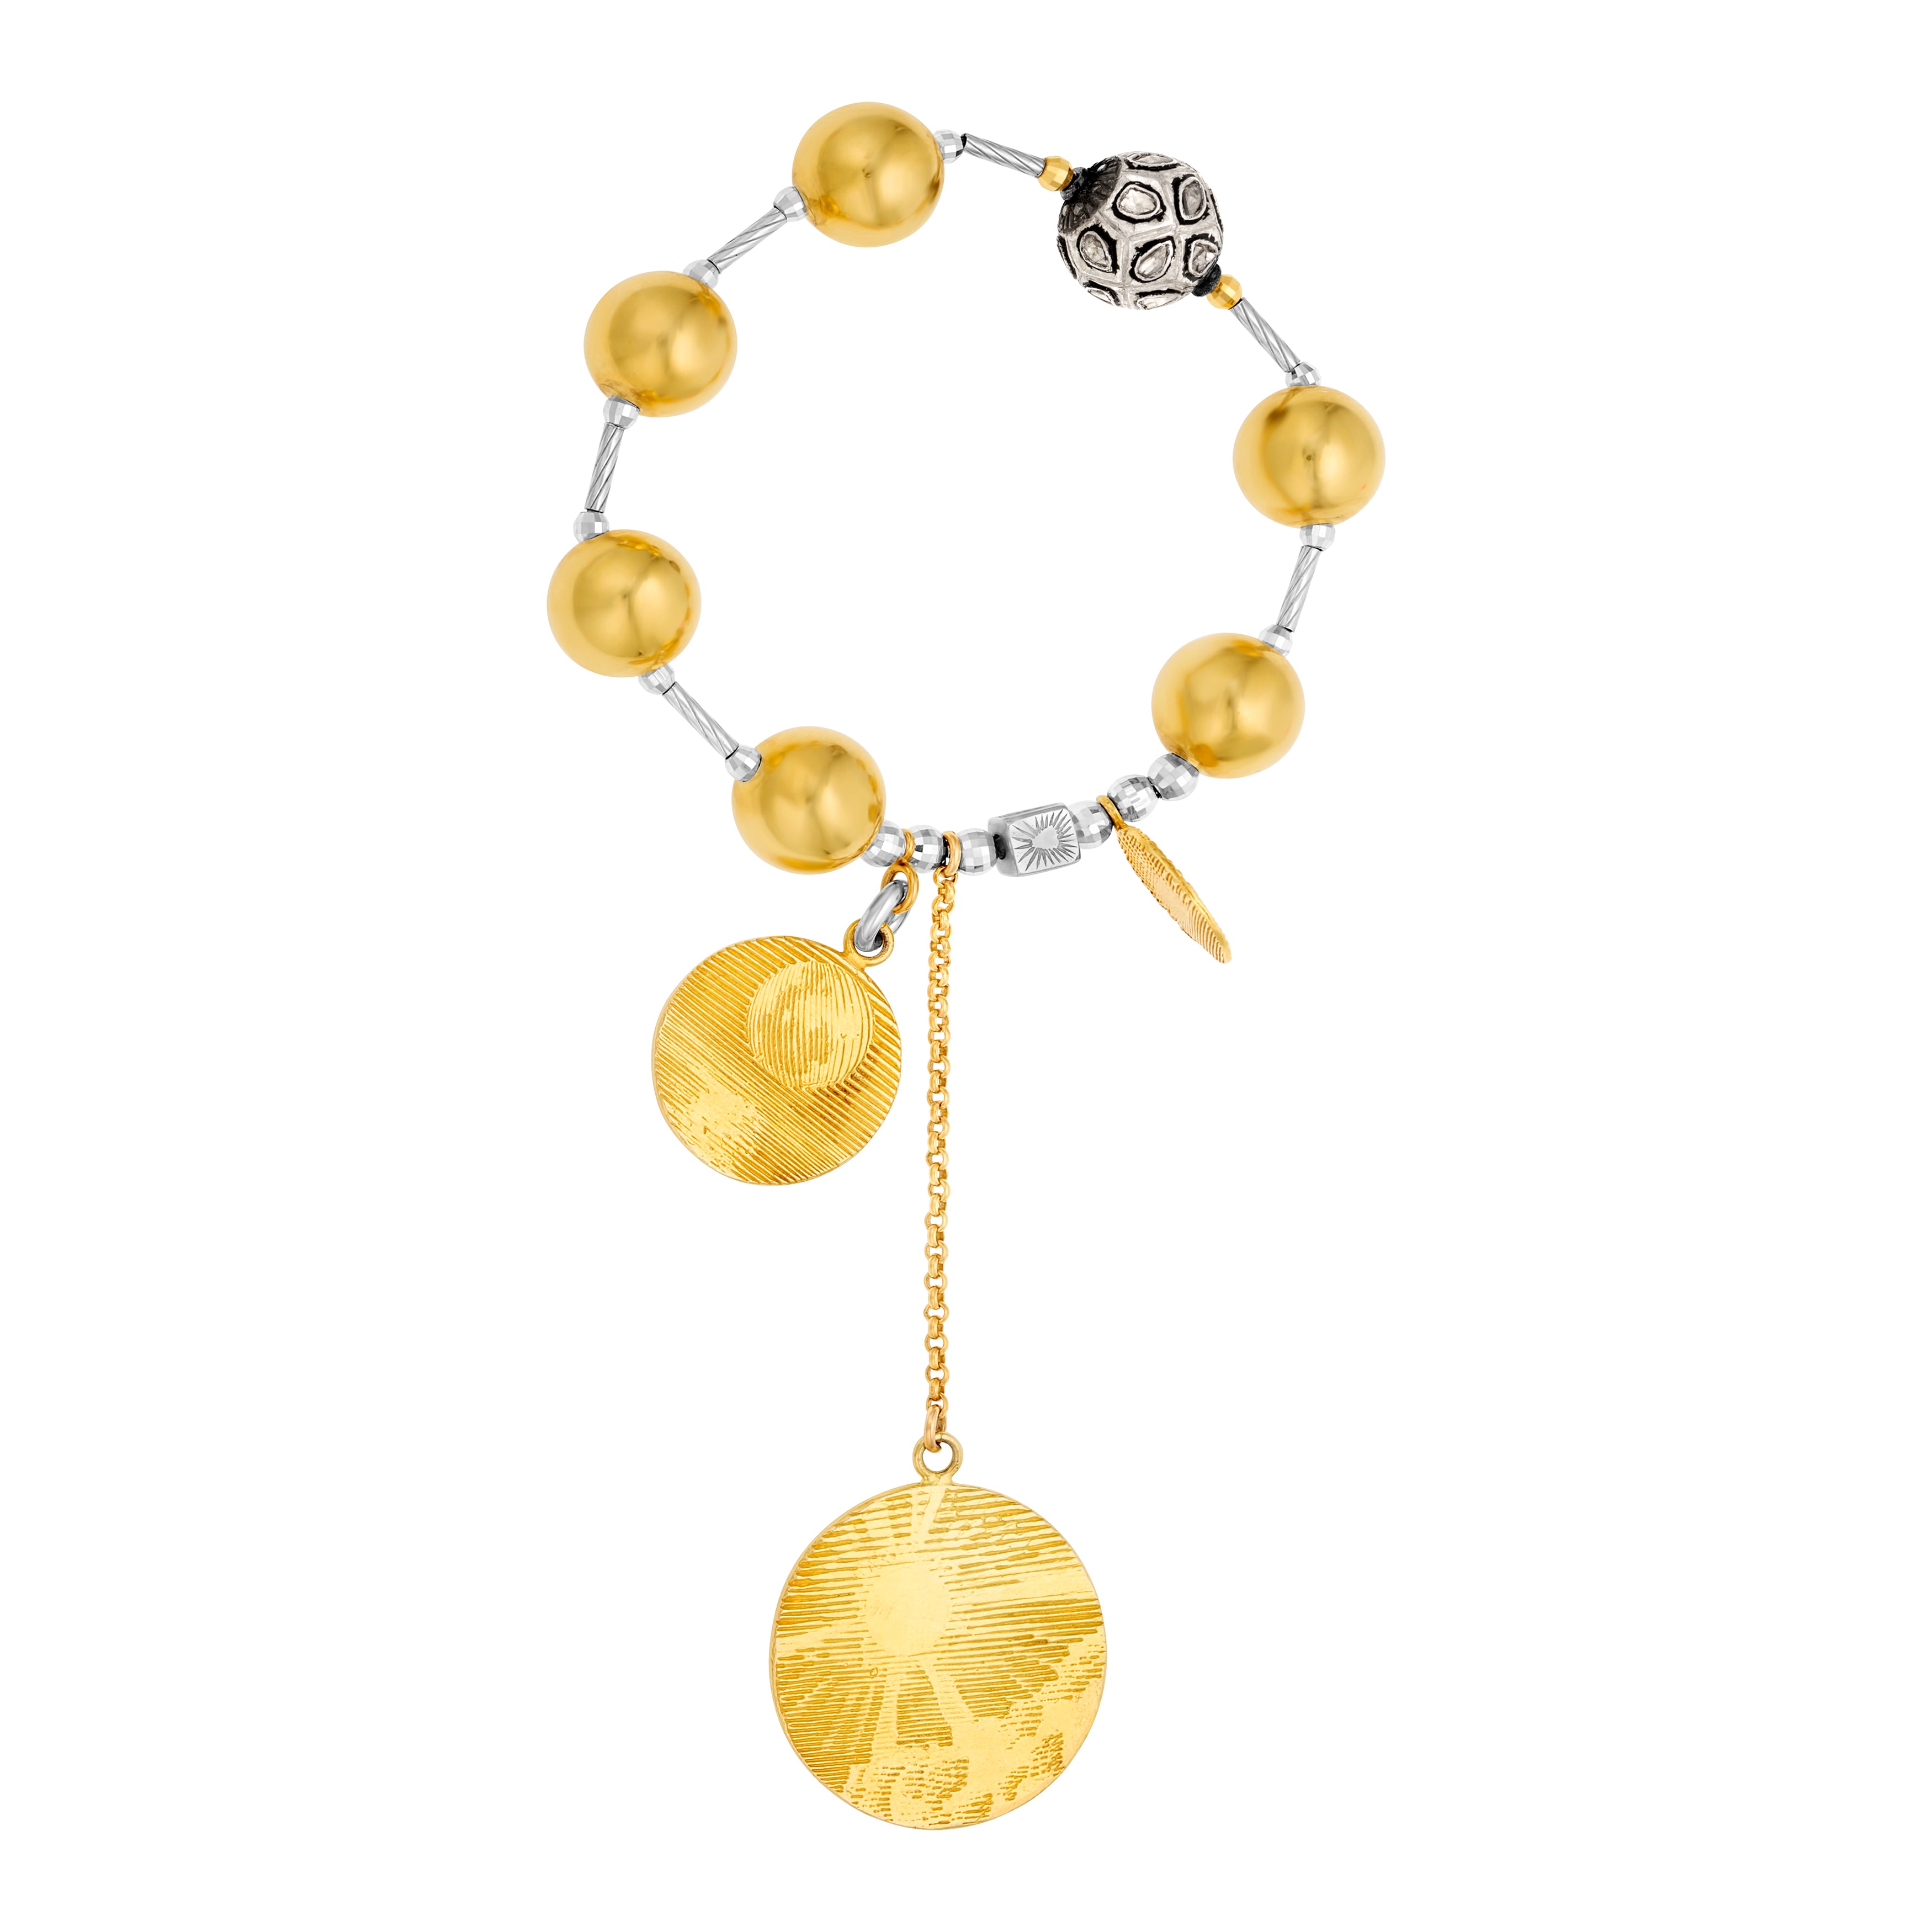 Movado | Sphere Lock Collection 14K yellow gold vermeil chain bracelet with  a twisting lock